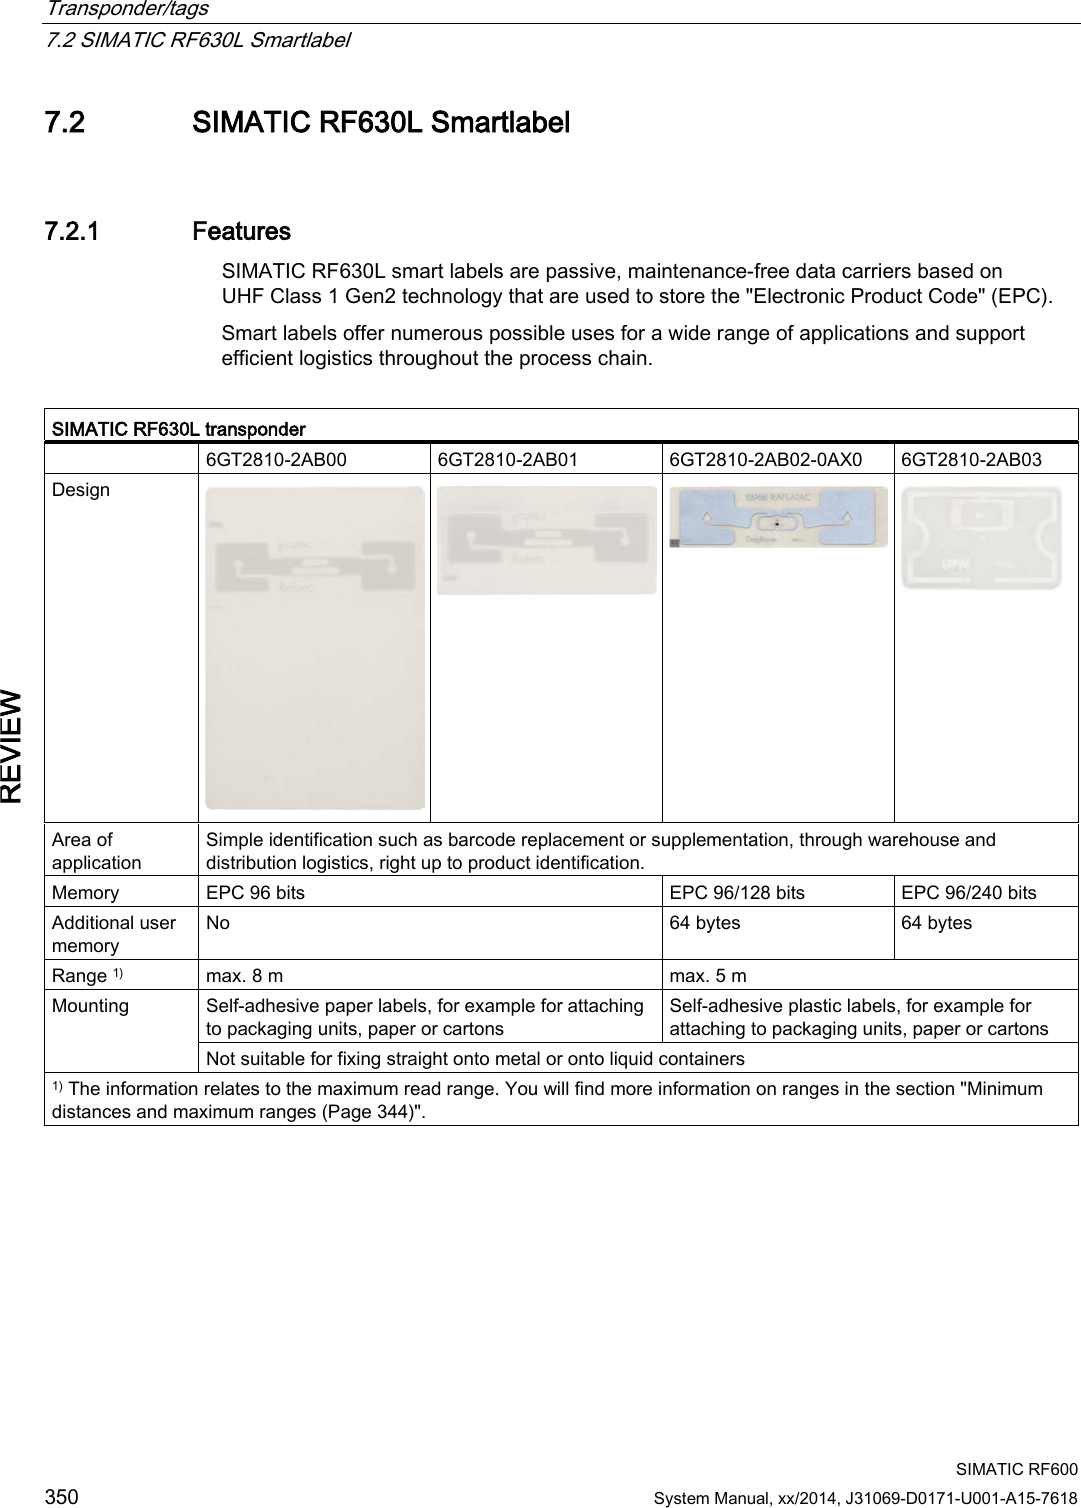 Transponder/tags   7.2 SIMATIC RF630L Smartlabel  SIMATIC RF600 350 System Manual, xx/2014, J31069-D0171-U001-A15-7618 REVIEW 7.2 SIMATIC RF630L Smartlabel 7.2.1 Features SIMATIC RF630L smart labels are passive, maintenance-free data carriers based on UHF Class 1 Gen2 technology that are used to store the &quot;Electronic Product Code&quot; (EPC). Smart labels offer numerous possible uses for a wide range of applications and support efficient logistics throughout the process chain.  SIMATIC RF630L transponder  6GT2810-2AB00 6GT2810-2AB01 6GT2810-2AB02-0AX0 6GT2810-2AB03 Design     Area of application Simple identification such as barcode replacement or supplementation, through warehouse and distribution logistics, right up to product identification. Memory EPC 96 bits EPC 96/128 bits EPC 96/240 bits Additional user memory No 64 bytes 64 bytes Range 1) max. 8 m max. 5 m Mounting  Self-adhesive paper labels, for example for attaching to packaging units, paper or cartons Self-adhesive plastic labels, for example for attaching to packaging units, paper or cartons Not suitable for fixing straight onto metal or onto liquid containers 1) The information relates to the maximum read range. You will find more information on ranges in the section &quot;Minimum distances and maximum ranges (Page 344)&quot;. 